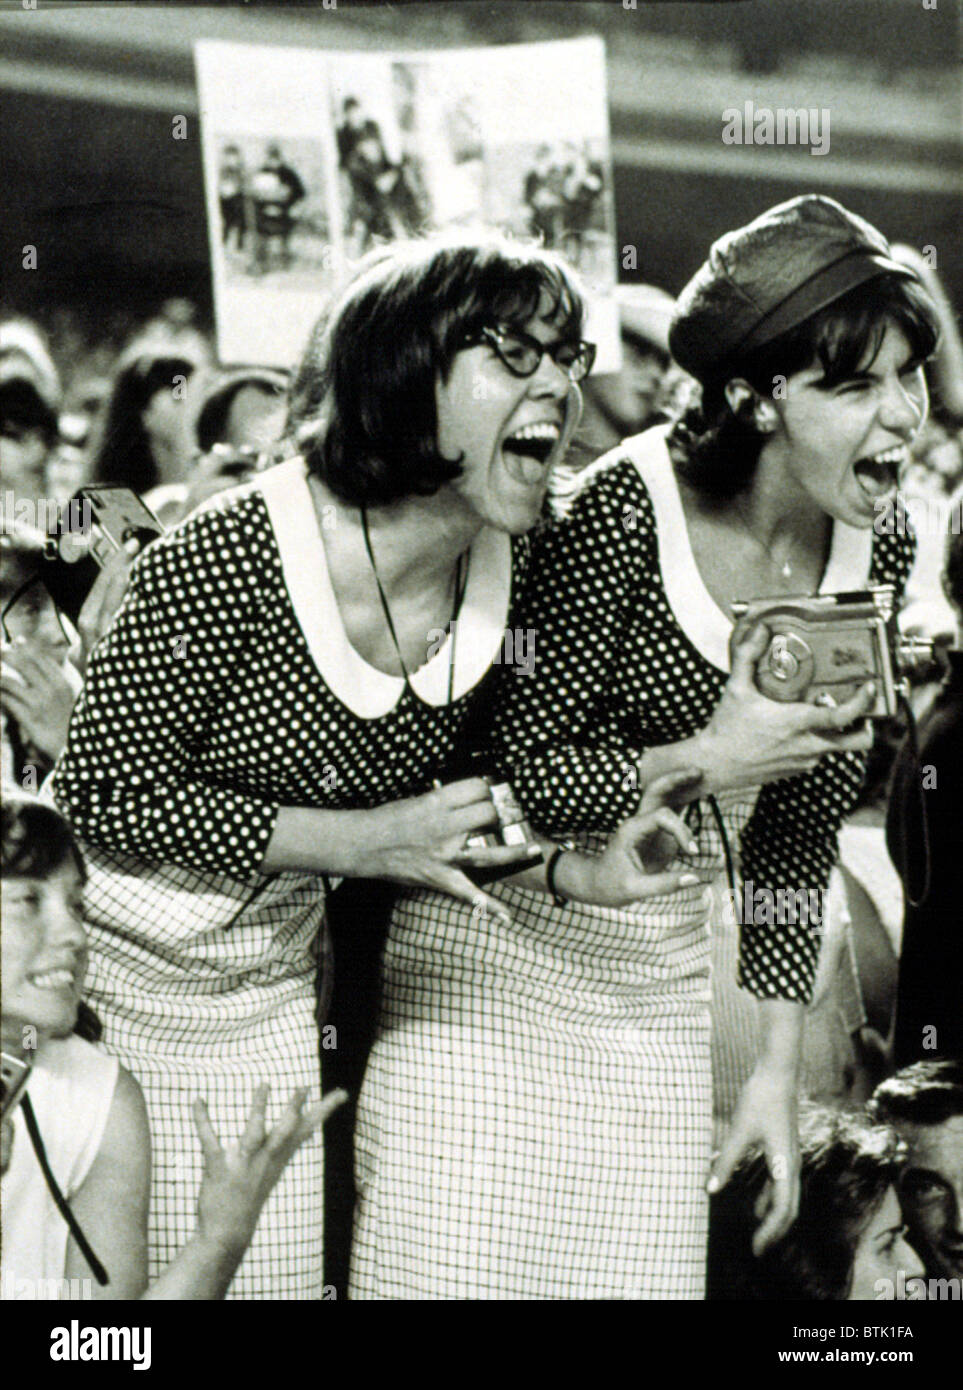 BEATLES FANS scream at a concert at Shea Stadium, NY, 8/15/65, displaying what is called, 'Beatlemania.' Stock Photo